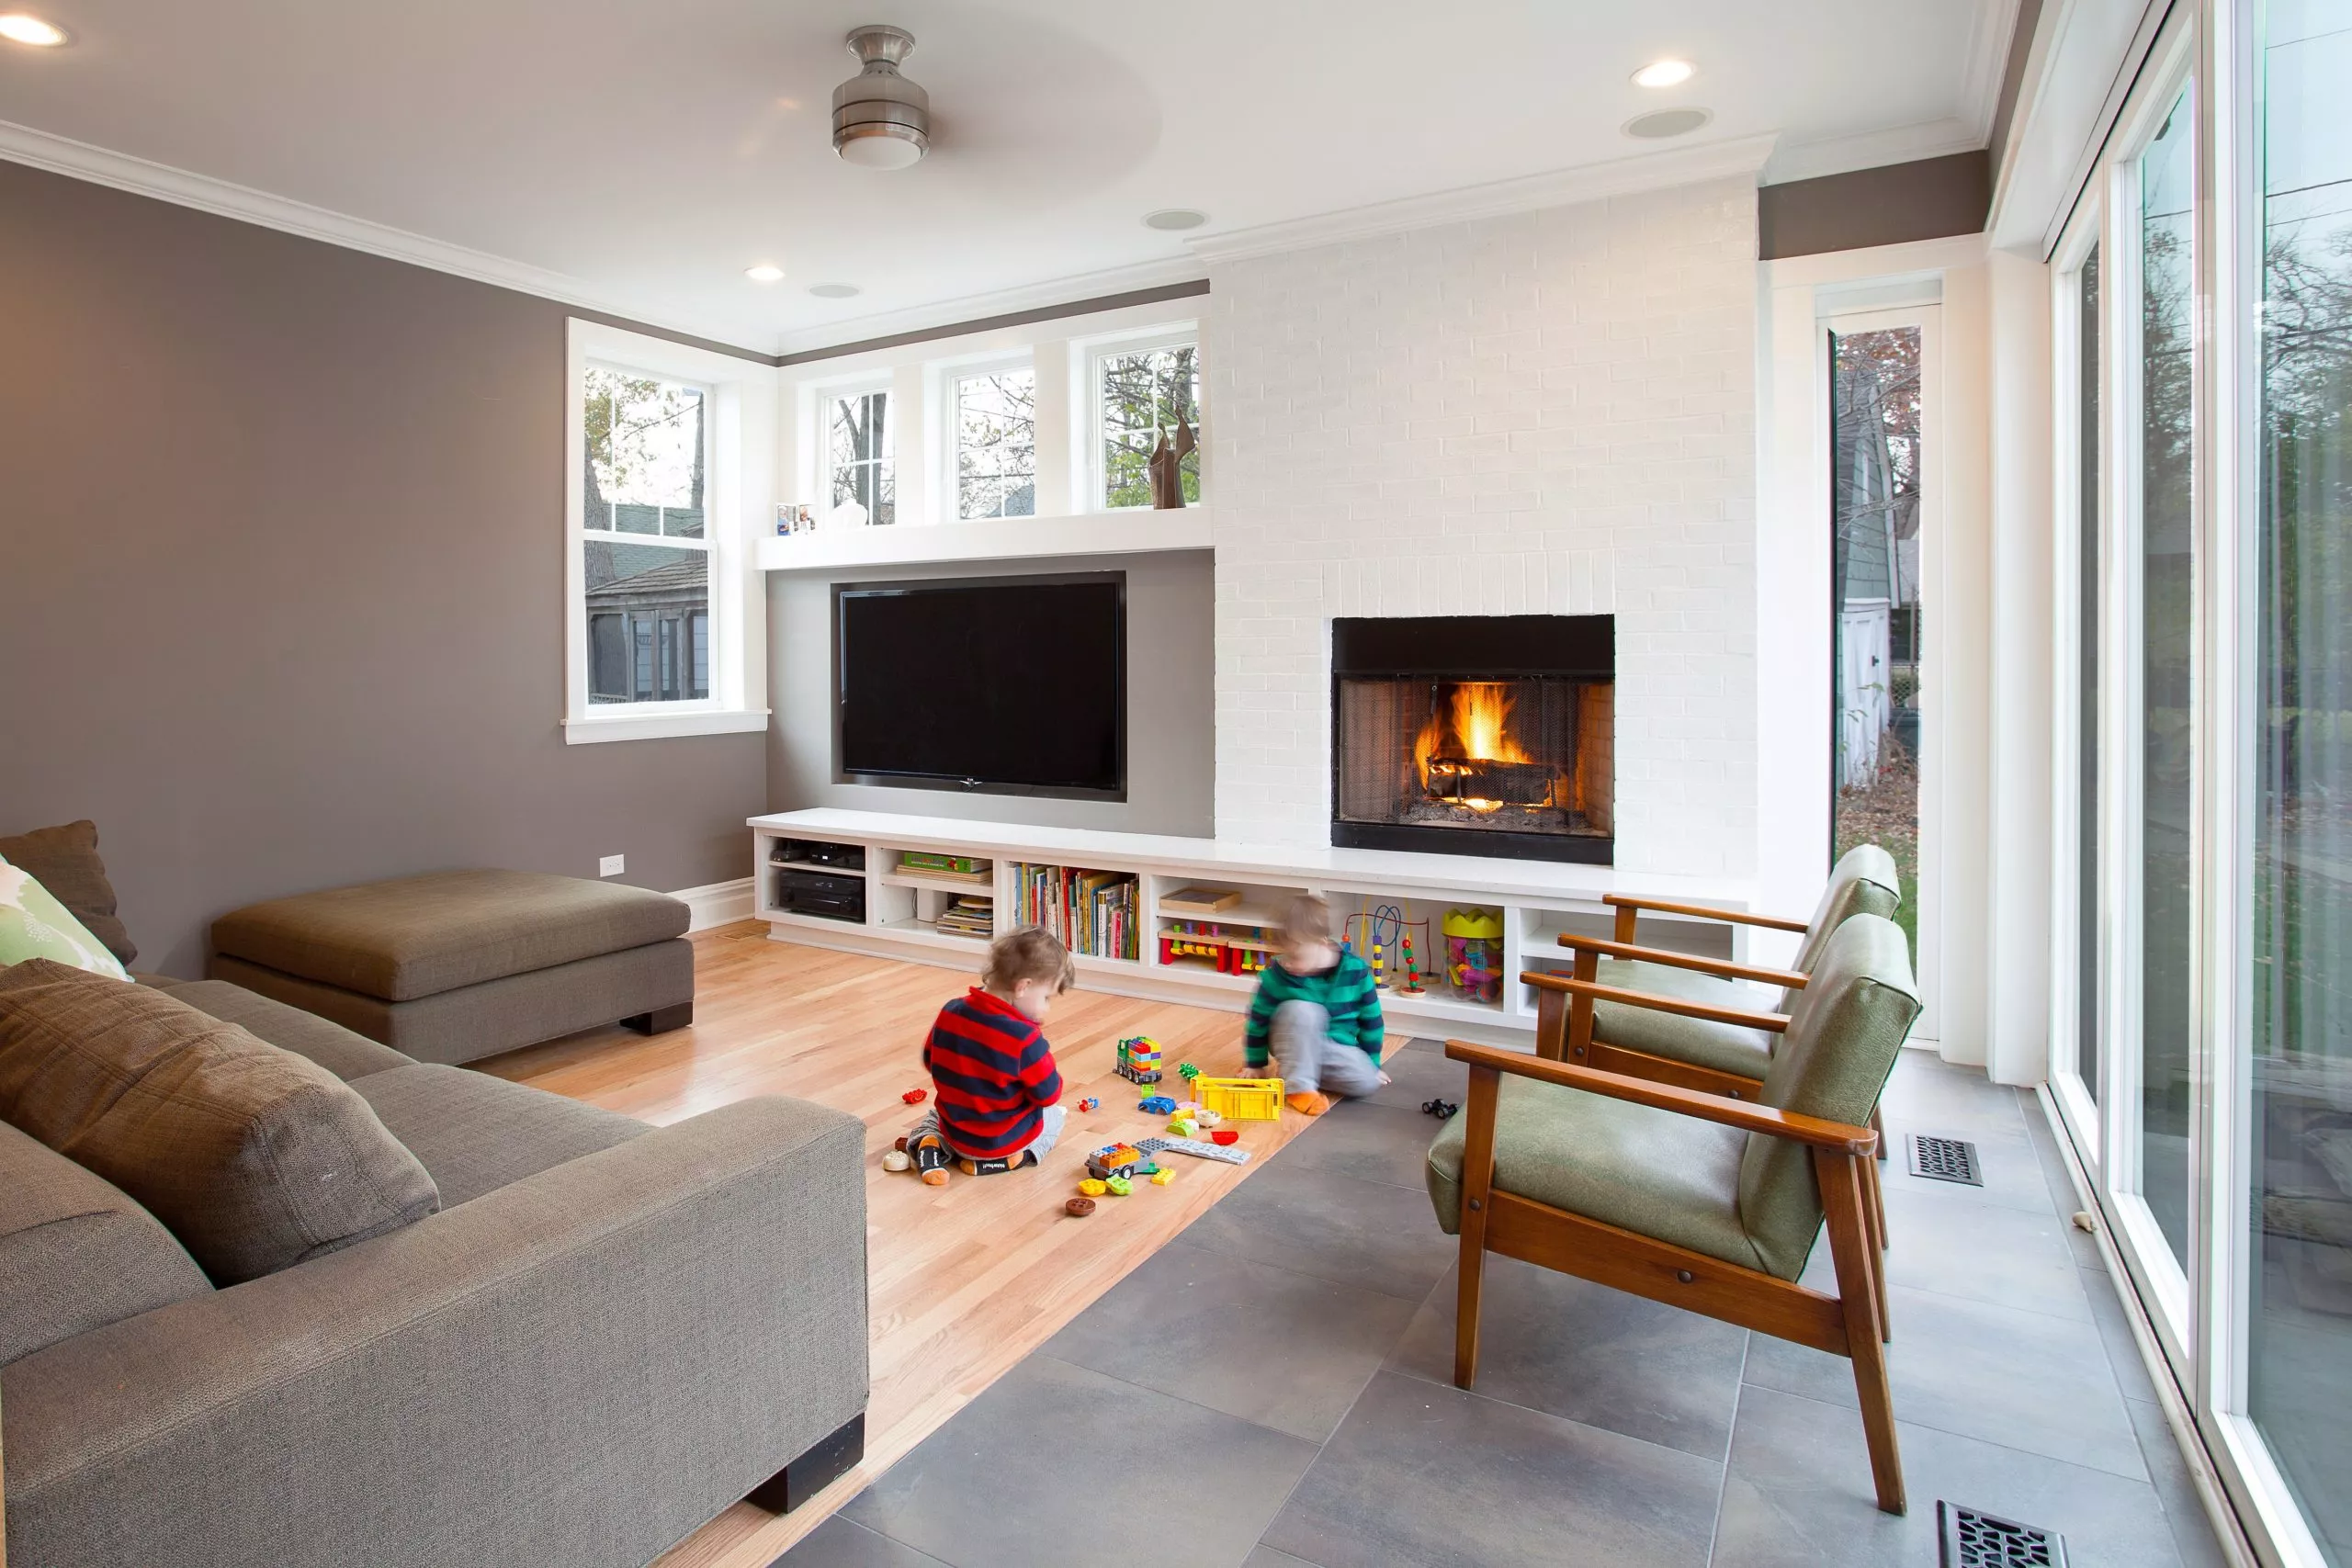 Two children playing in a living room with couch & chairs, built-in fireplace & mounted TV